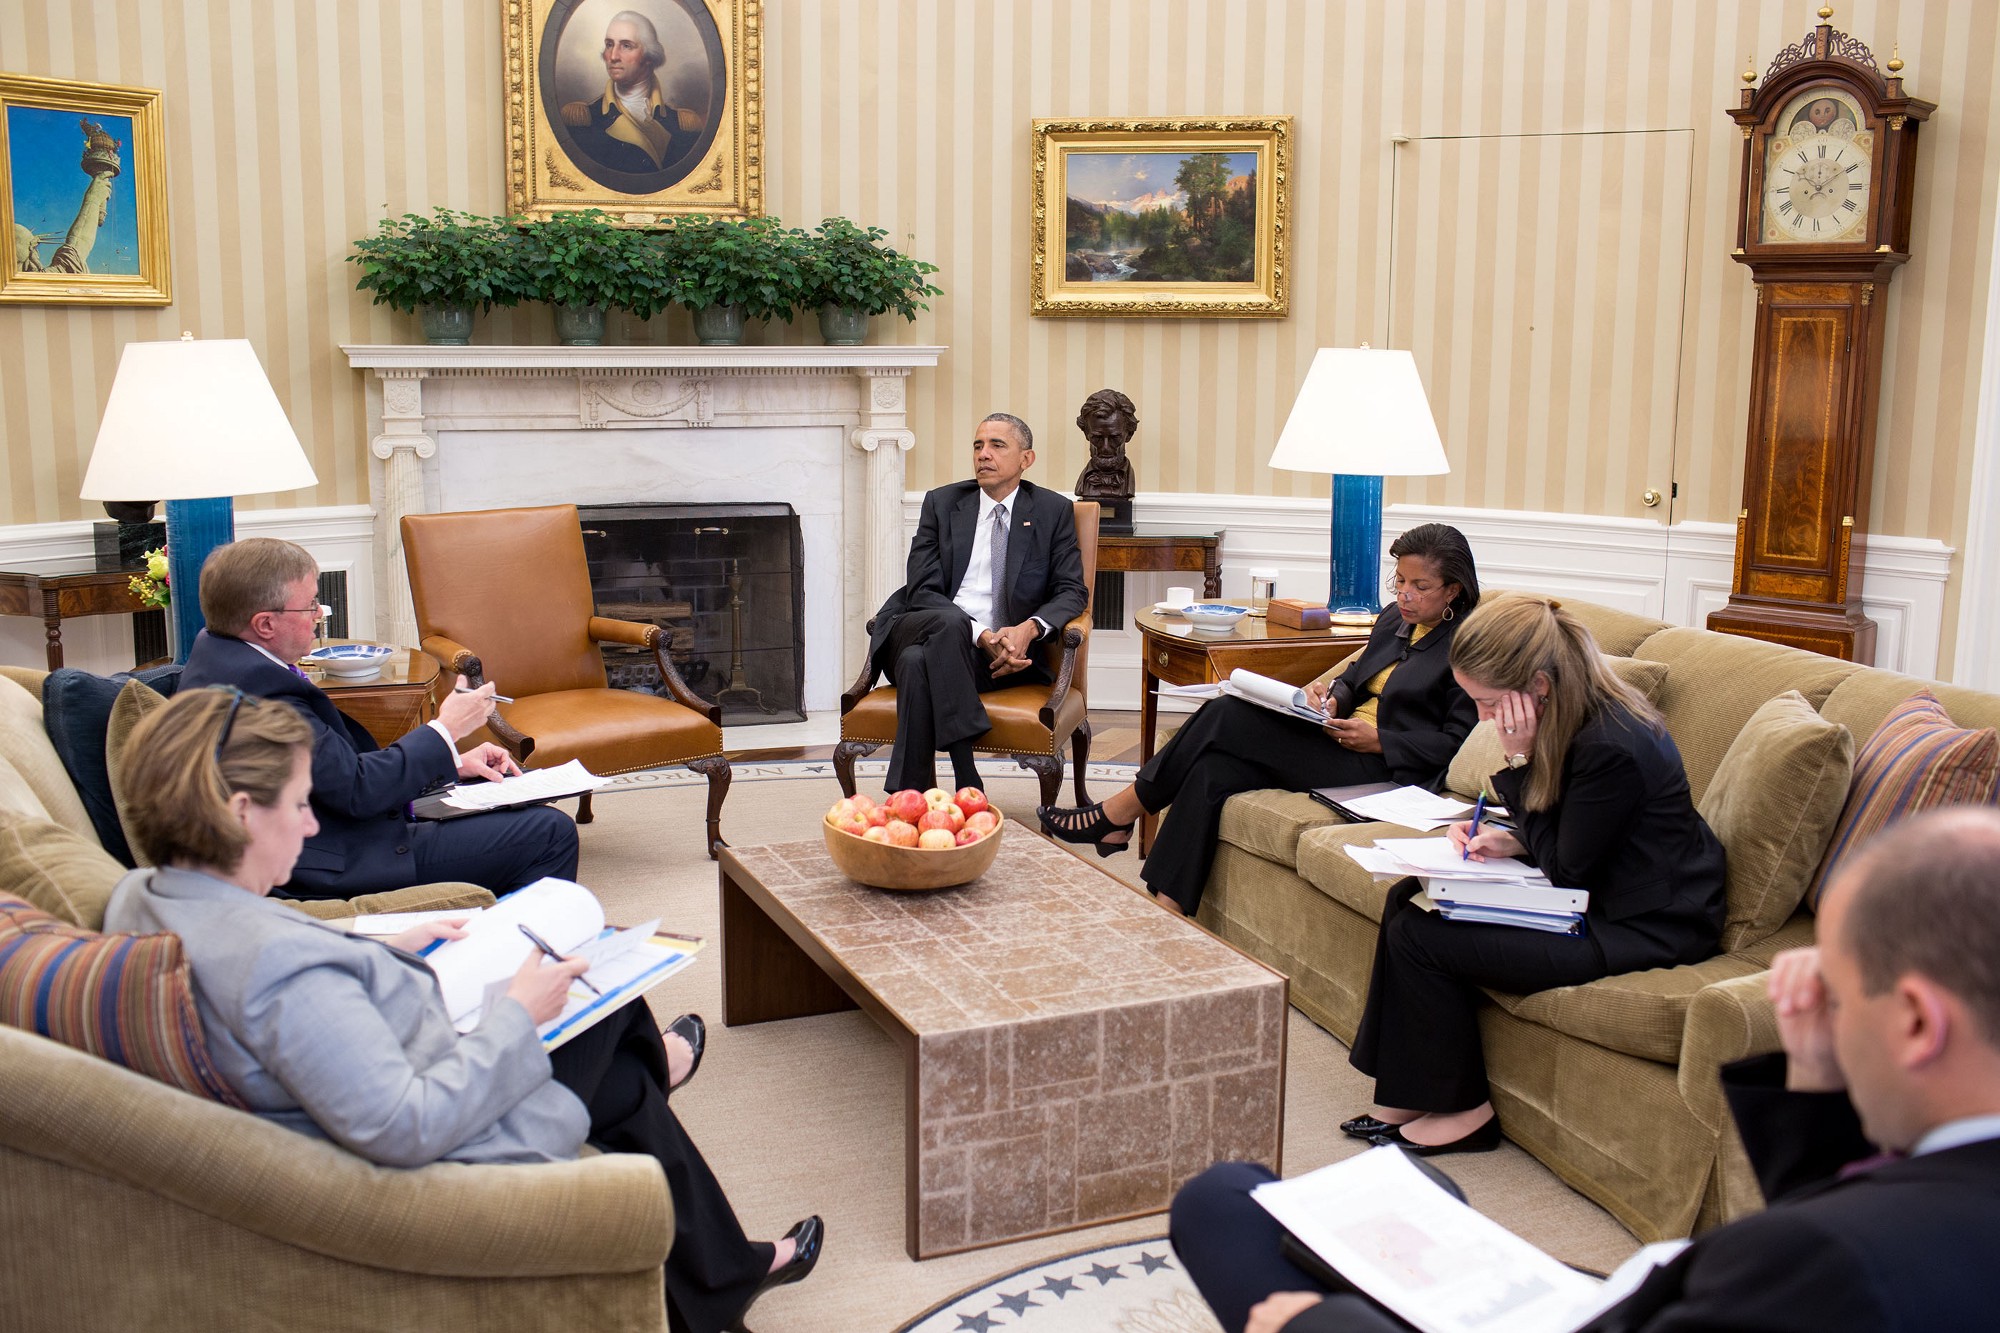 President Obama receives the Presidential Daily Briefing in the Oval Office, June 25, 2015. (Official White House Photo by Pete Souza)